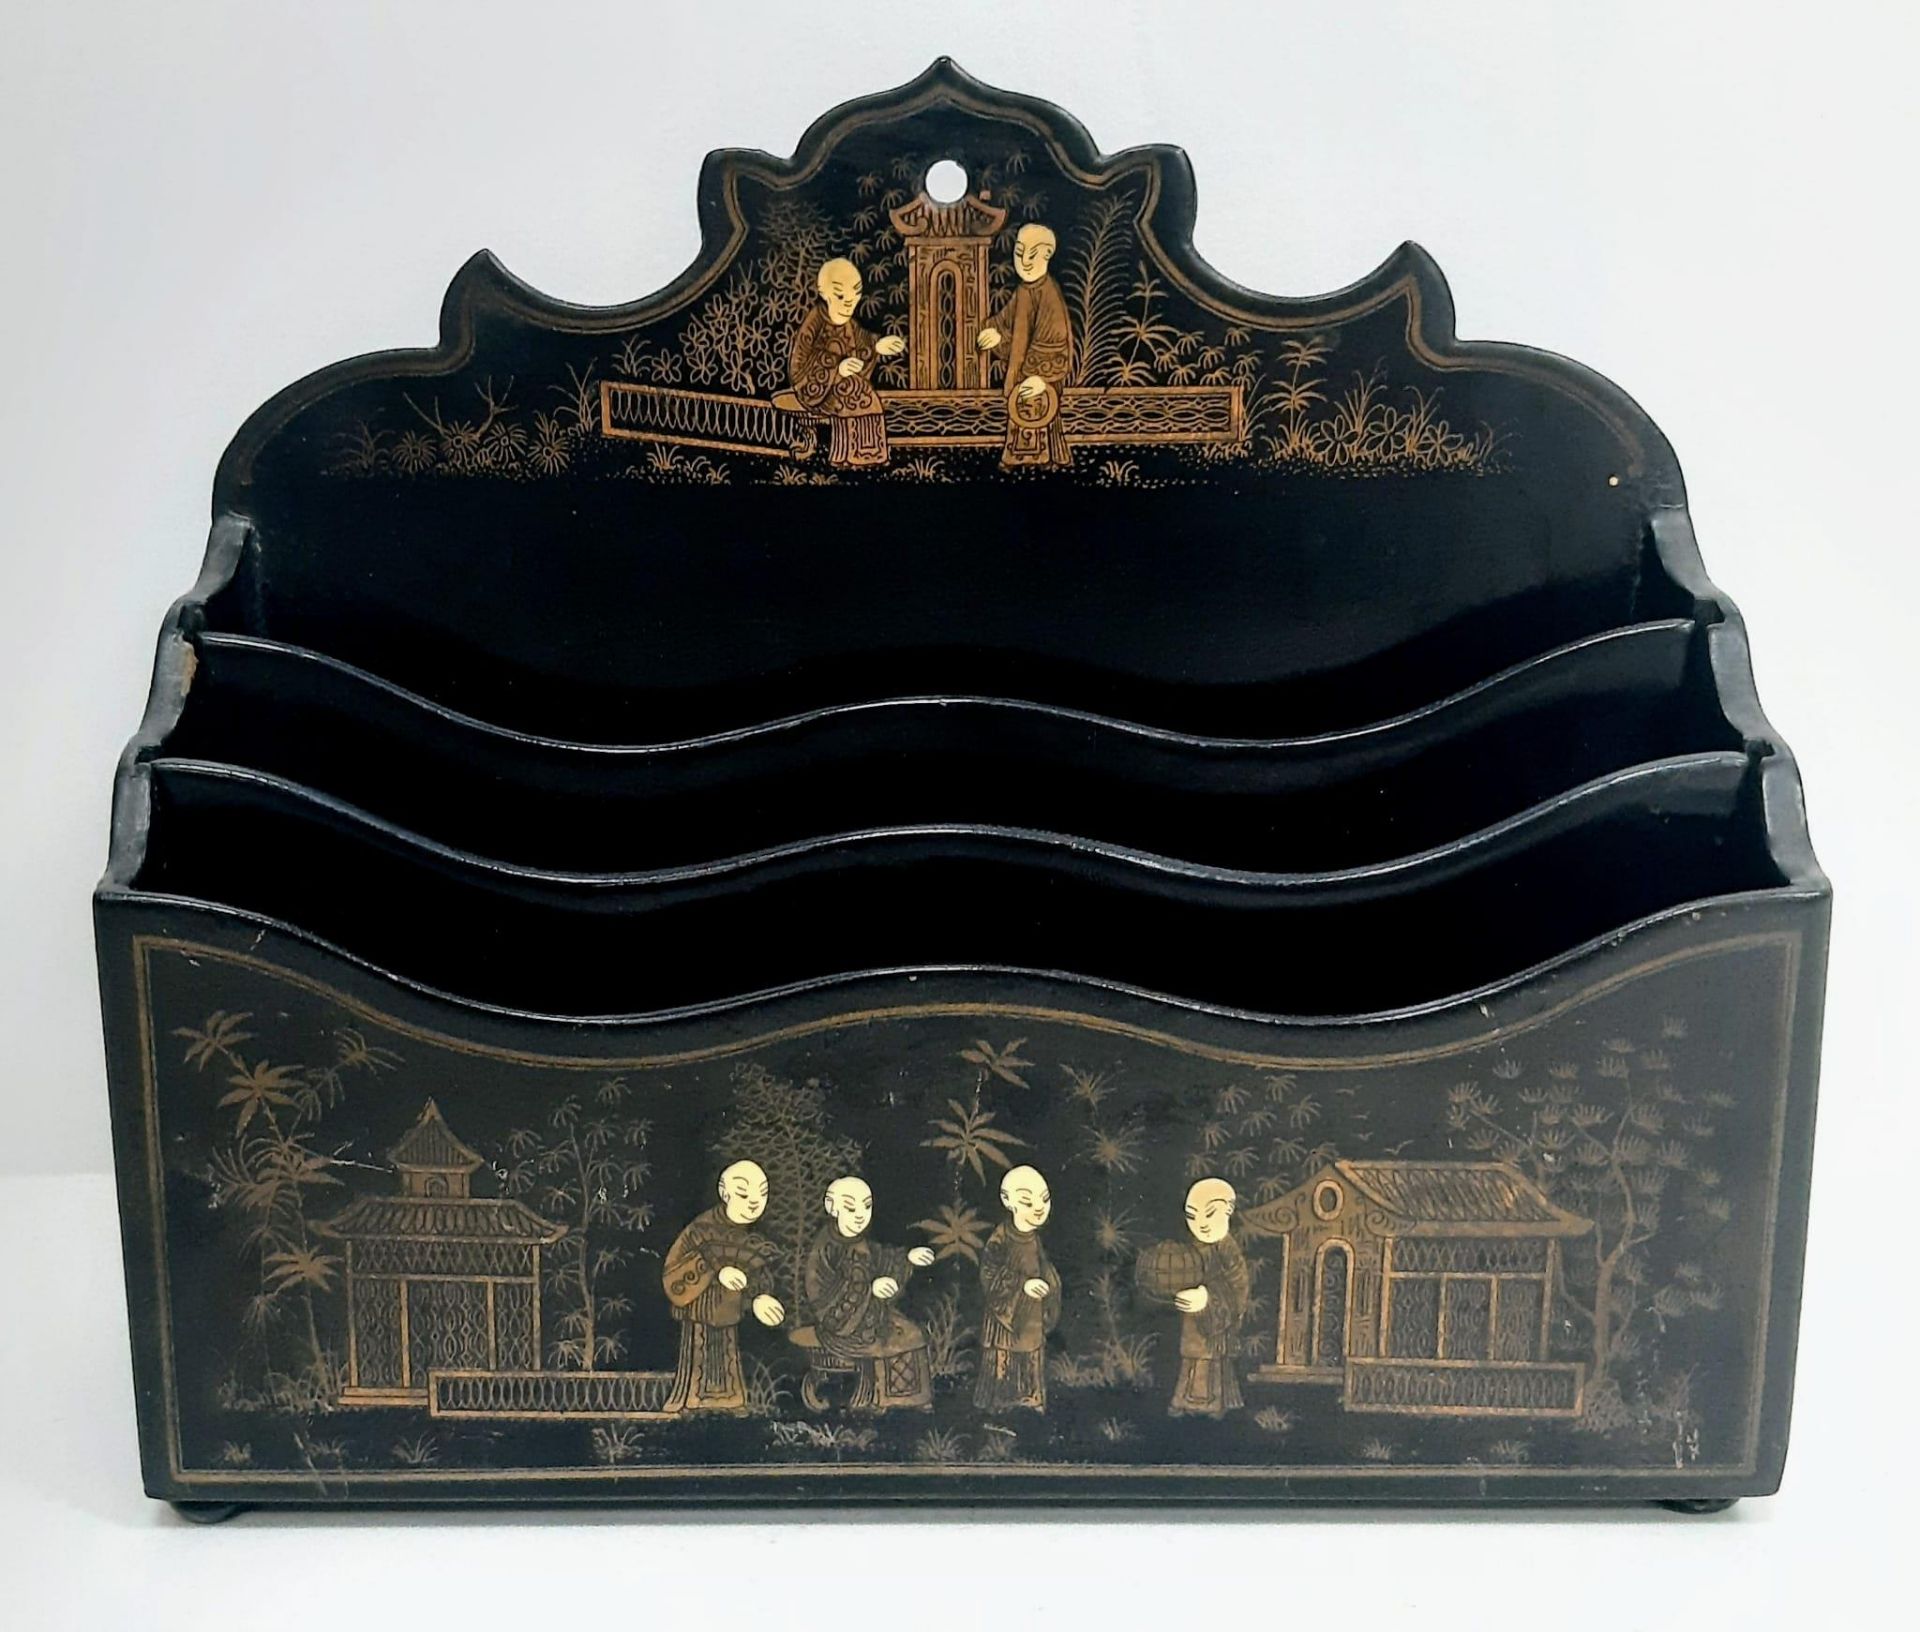 An Exceptional Quality Victorian Gilded Paper Mache Letter Rack - Decorated in a chinoiserie